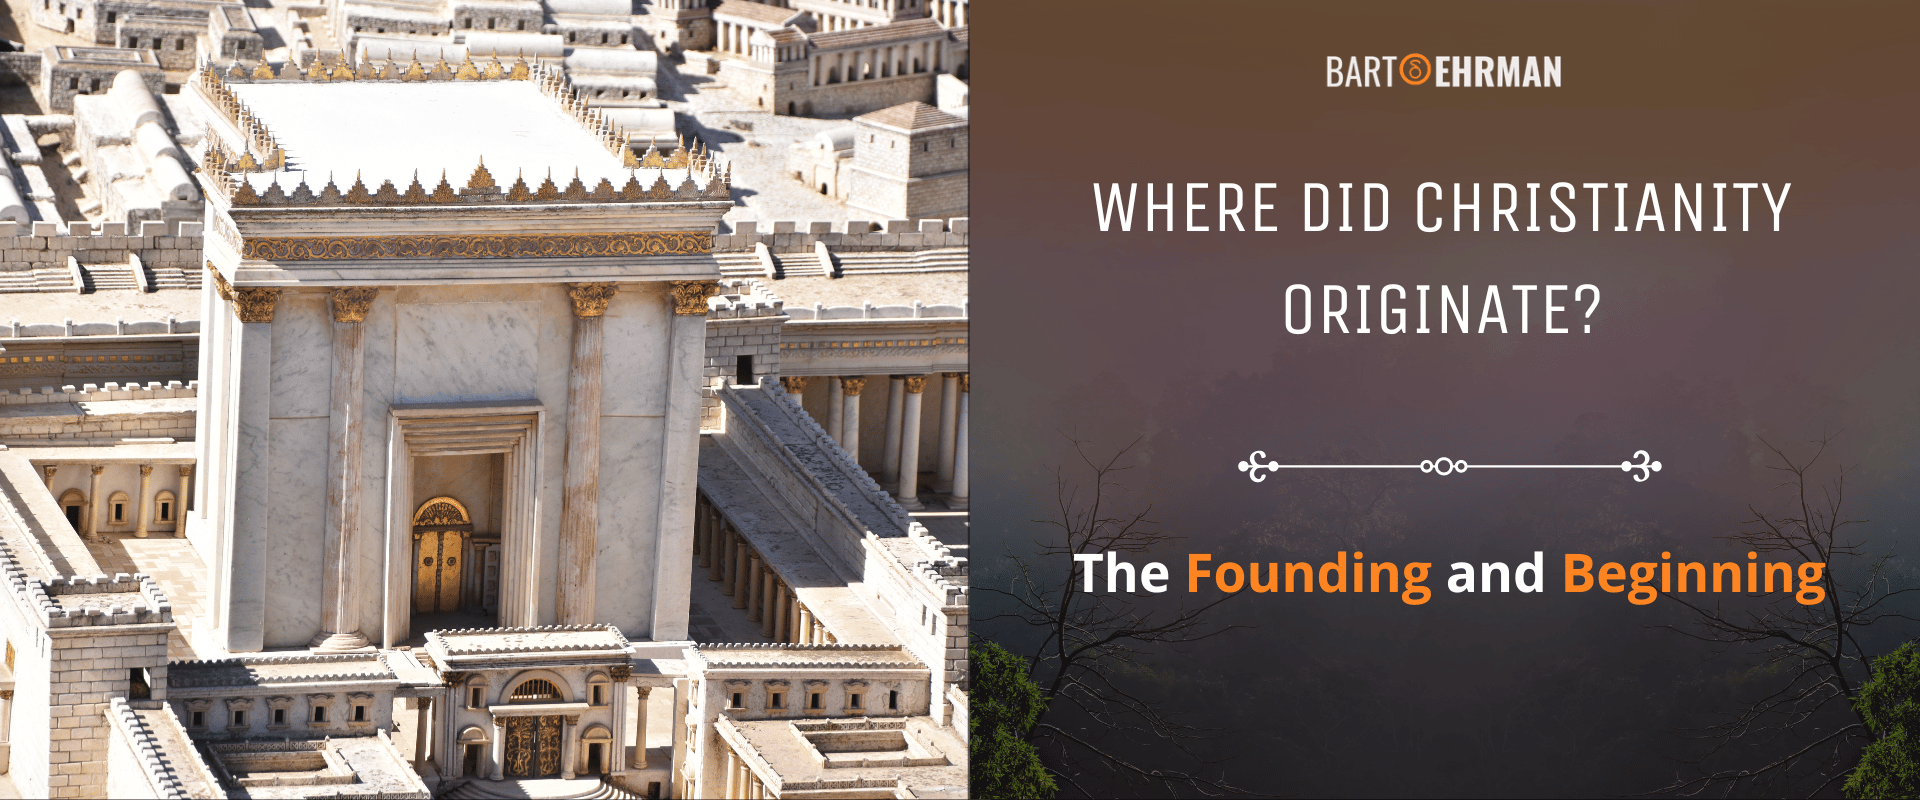 Where Did Christianity Originate (The Founding and Beginning)